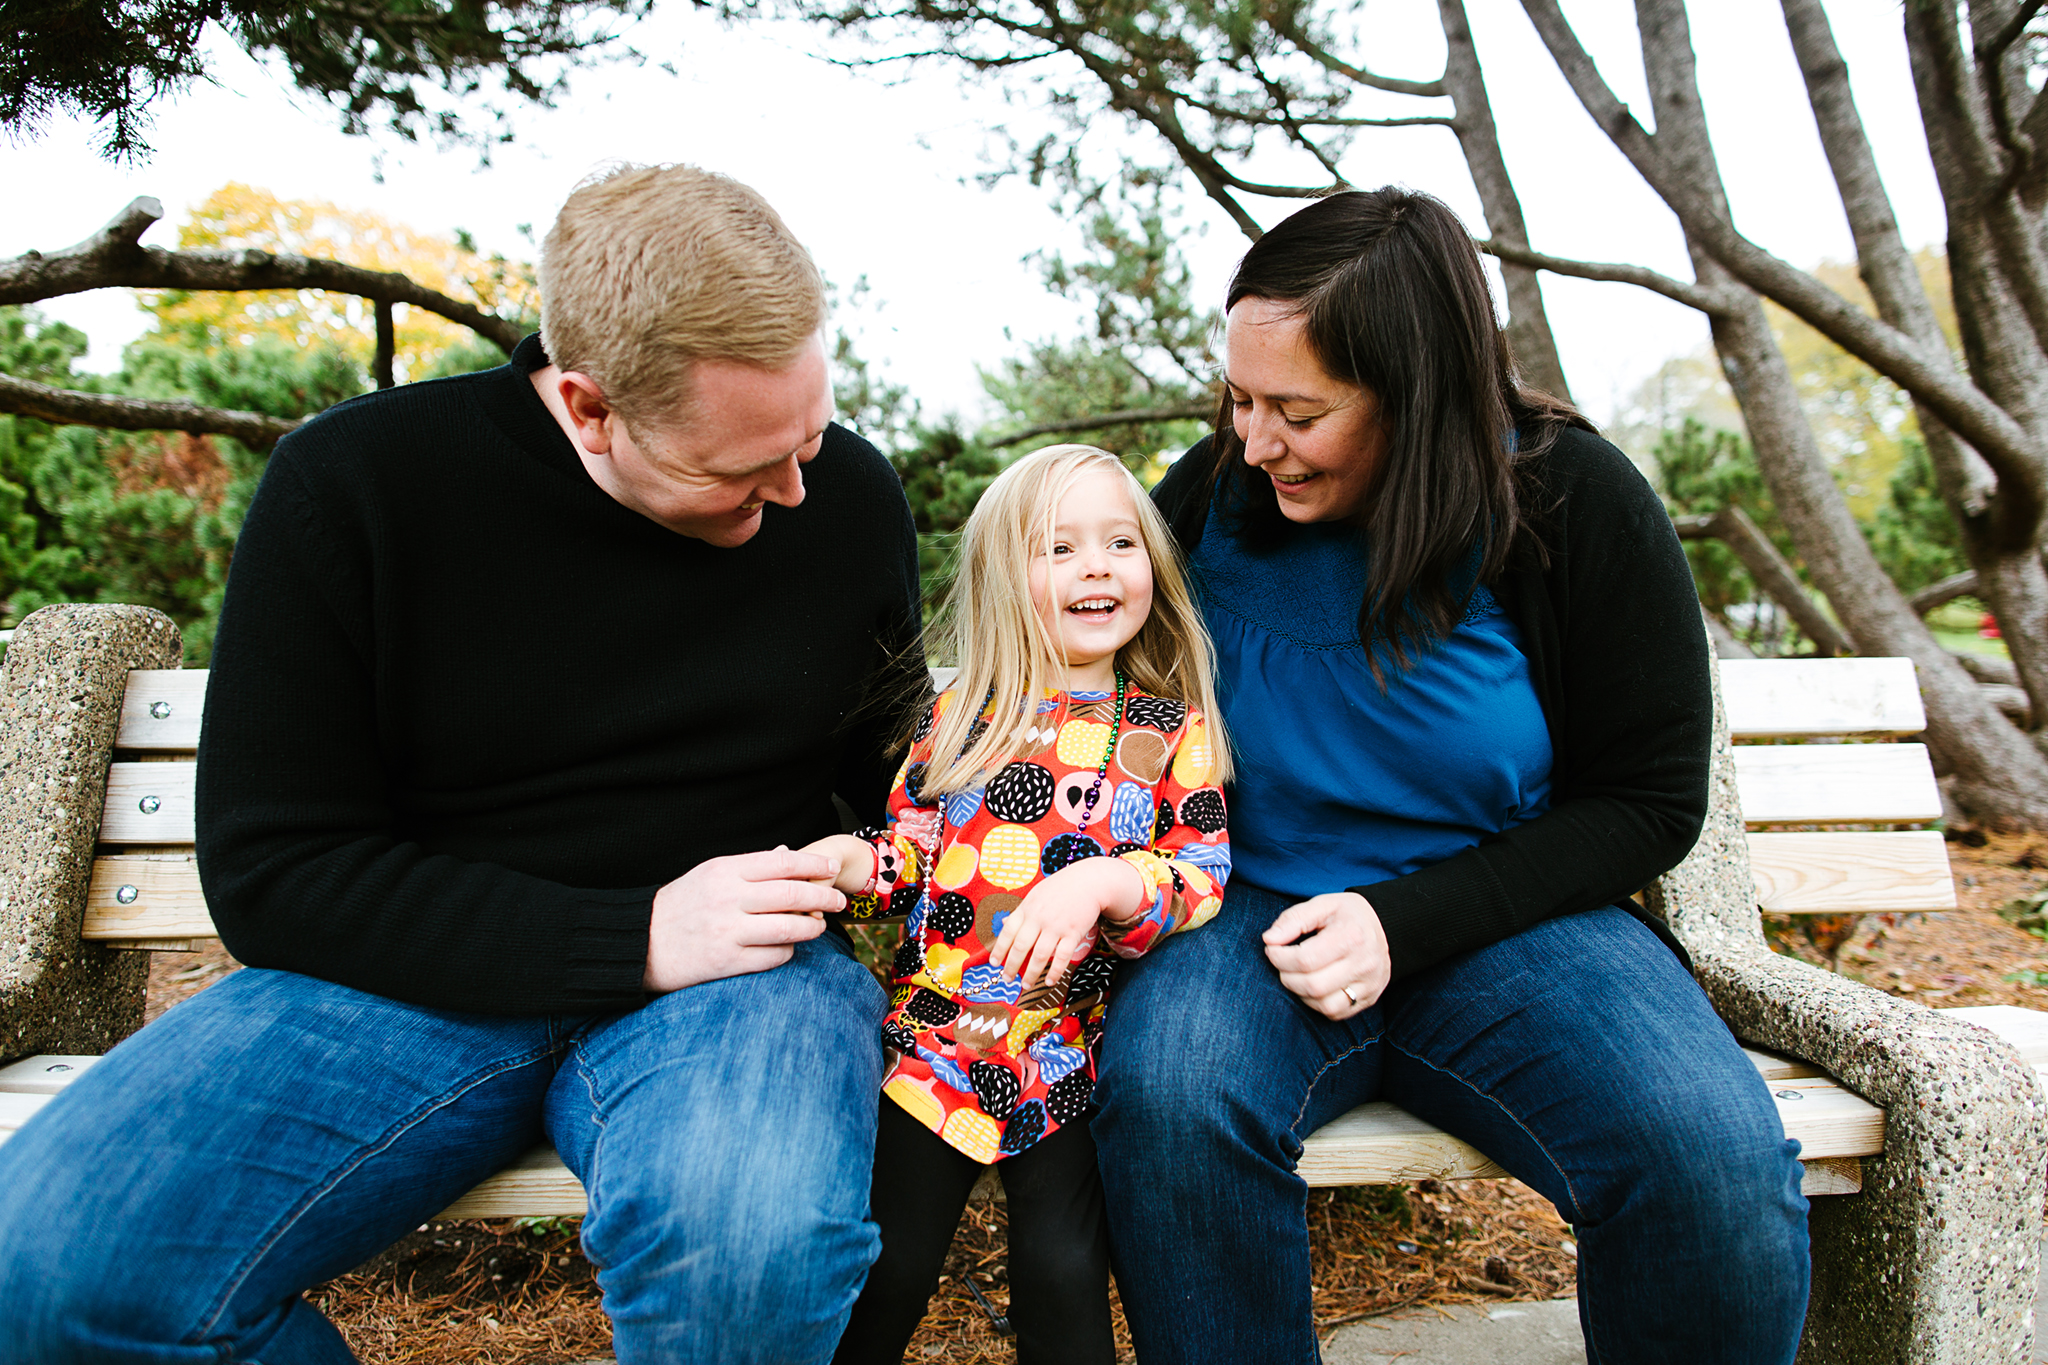 Fall Family Photos at the Minneapolis Peace Garden by Lake Harriet